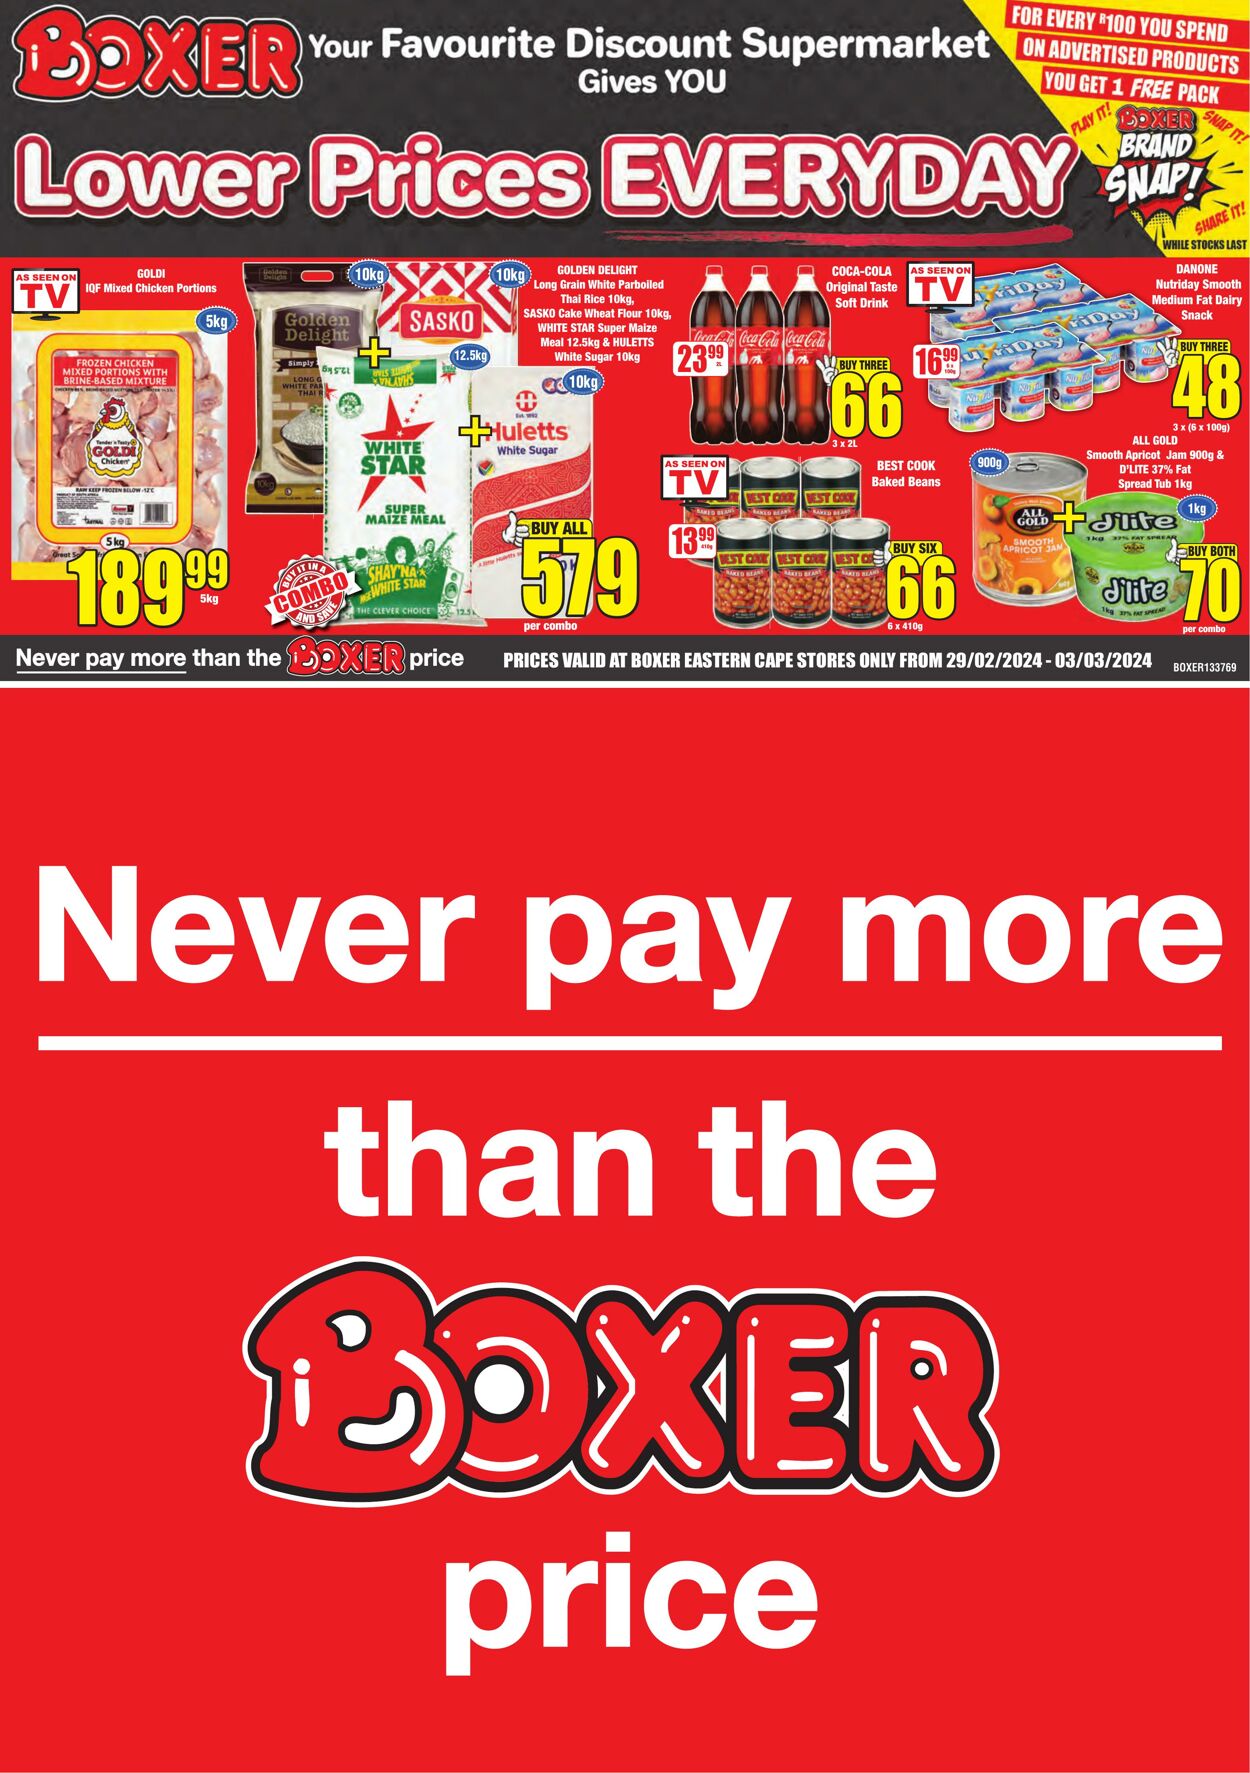 Boxer Promotional specials